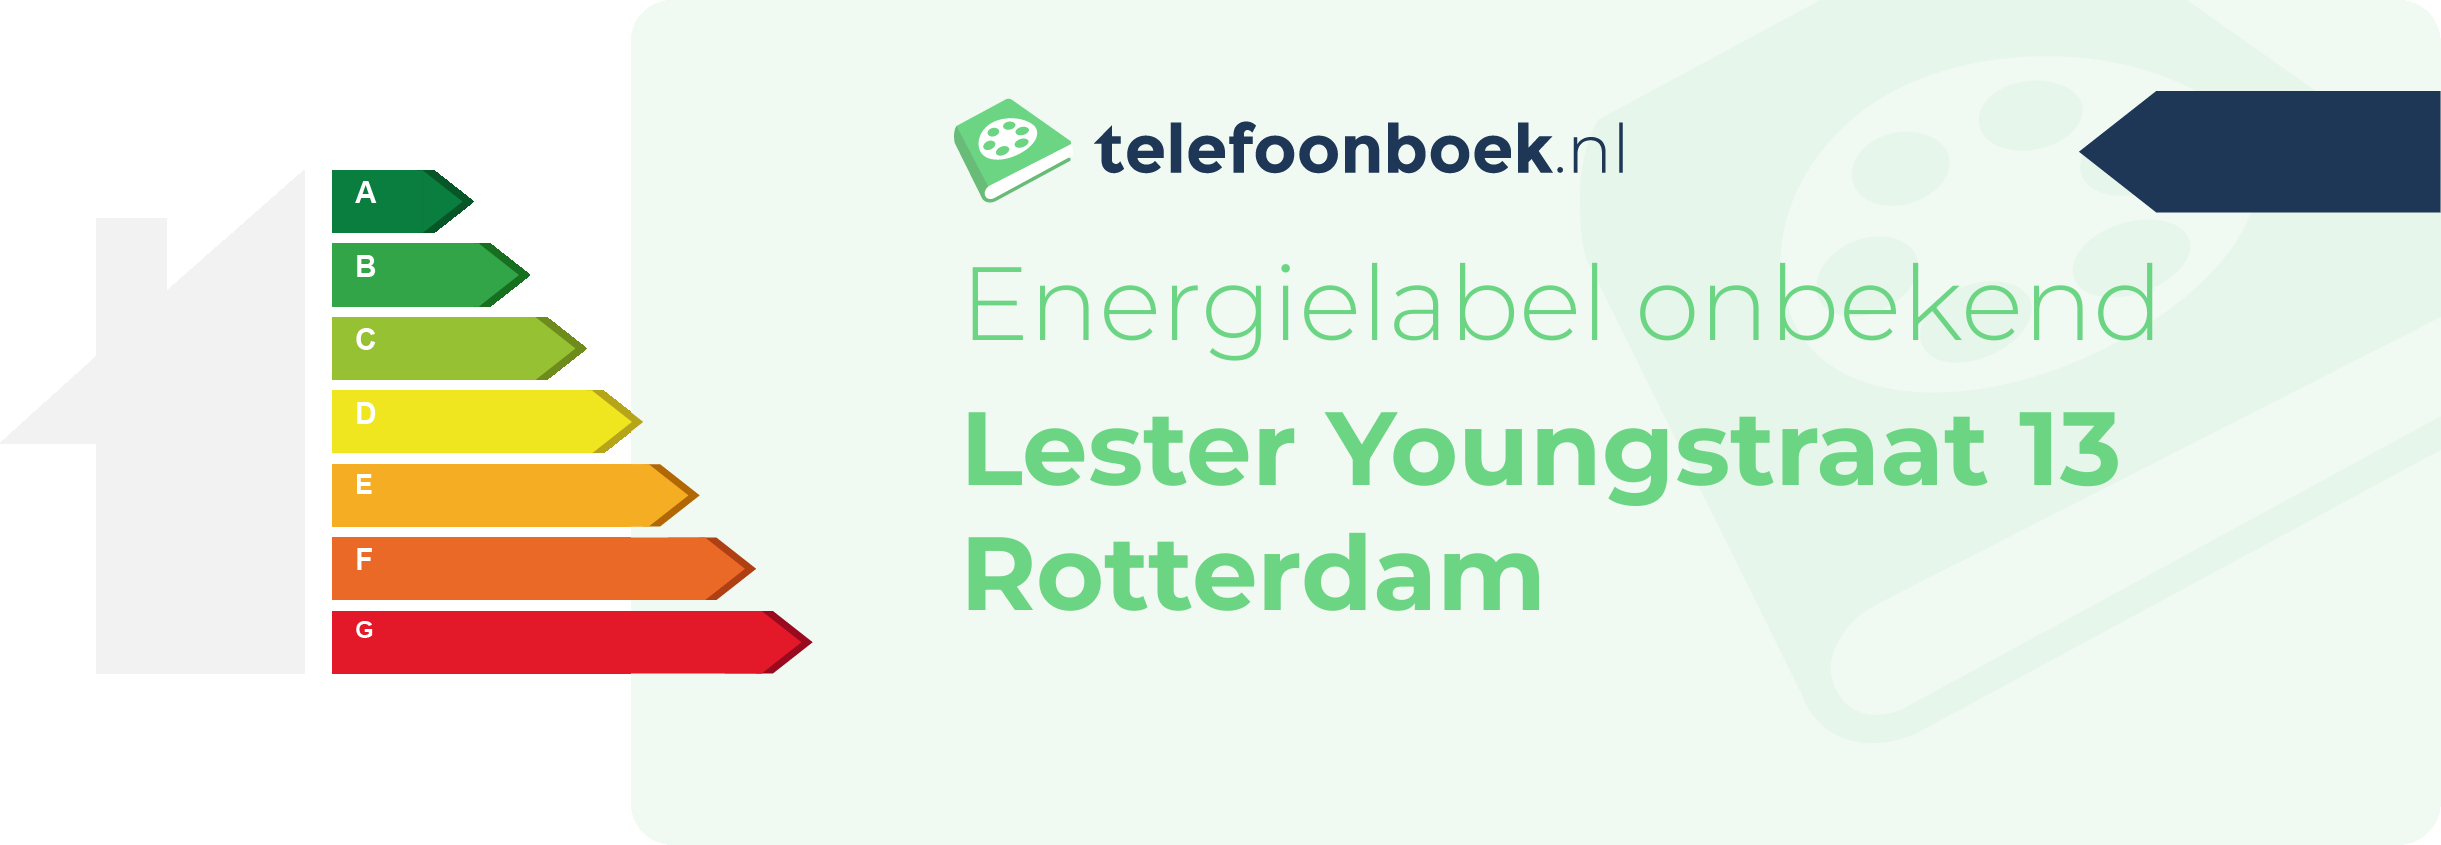 Energielabel Lester Youngstraat 13 Rotterdam